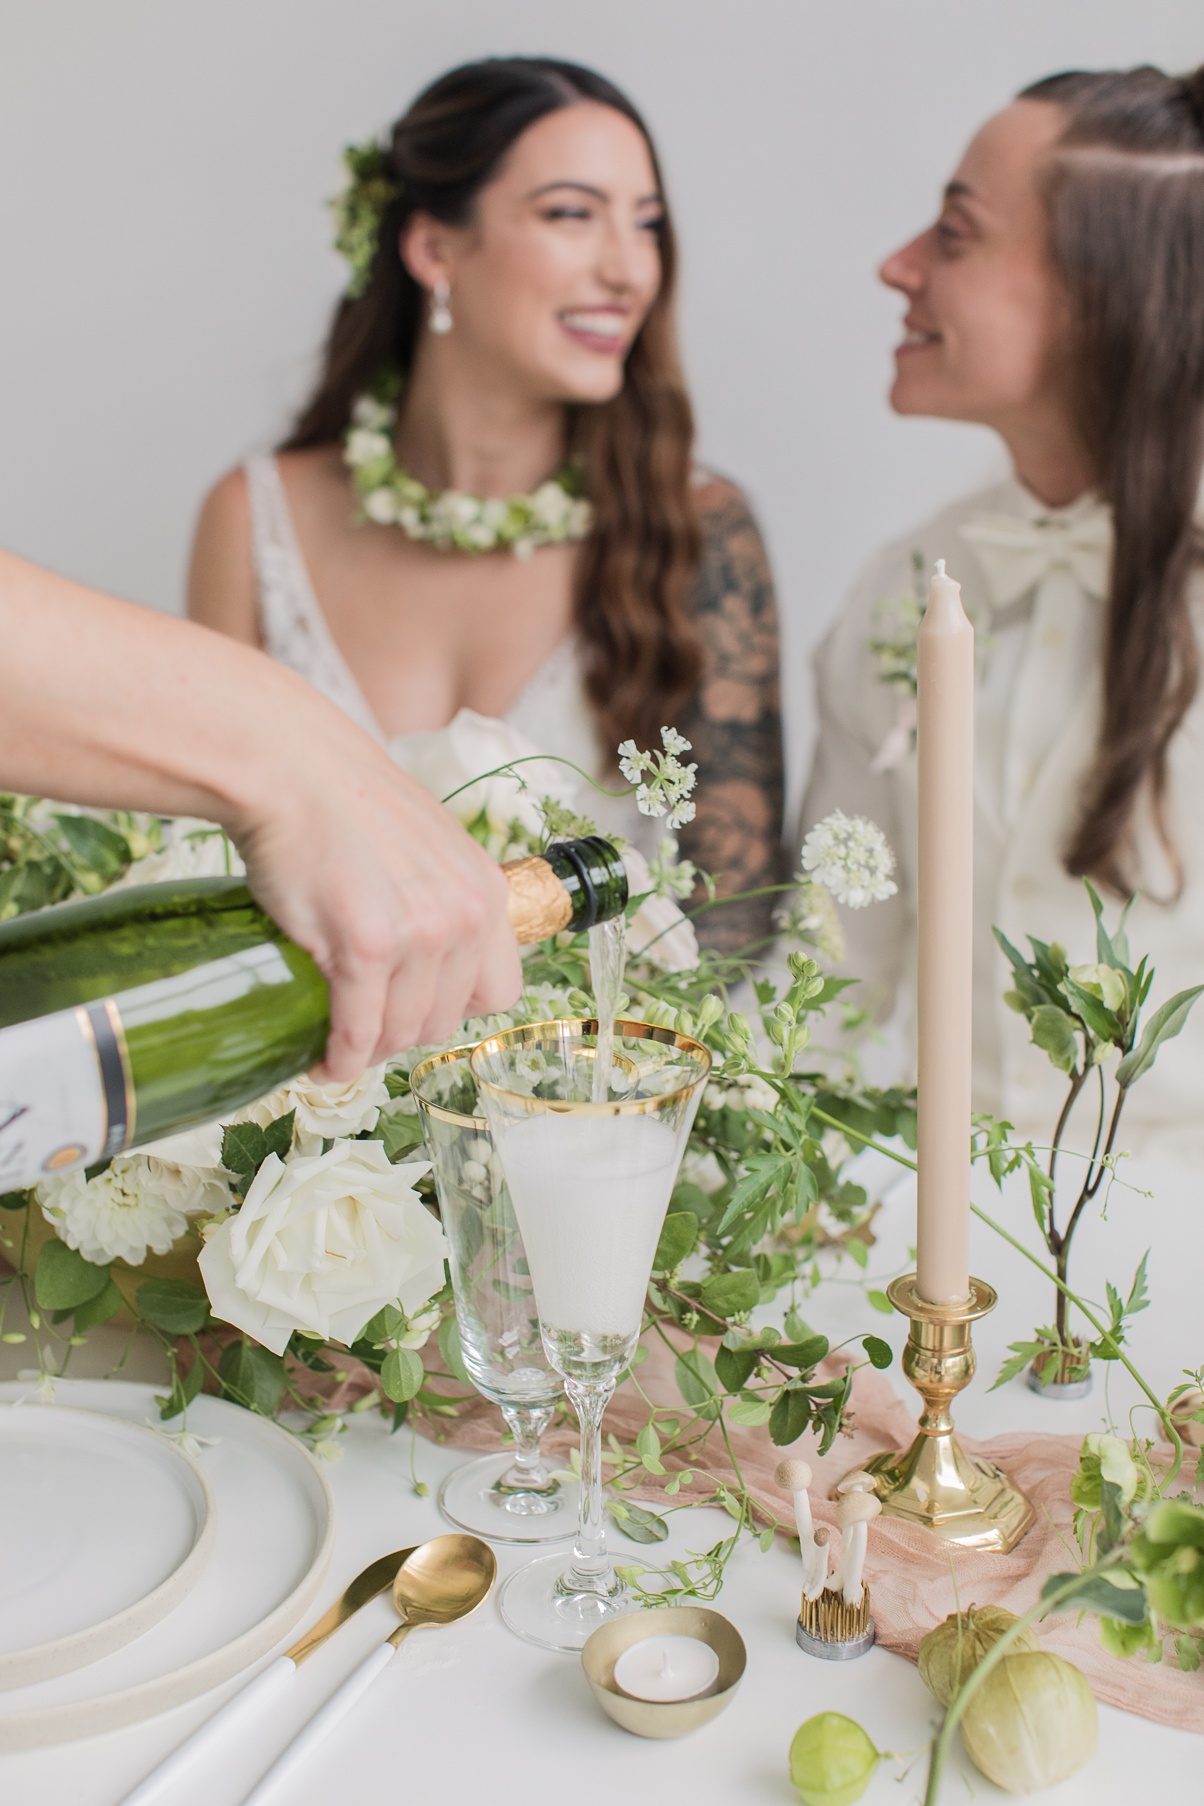 Champagne being poured as brides look at each other lovingly